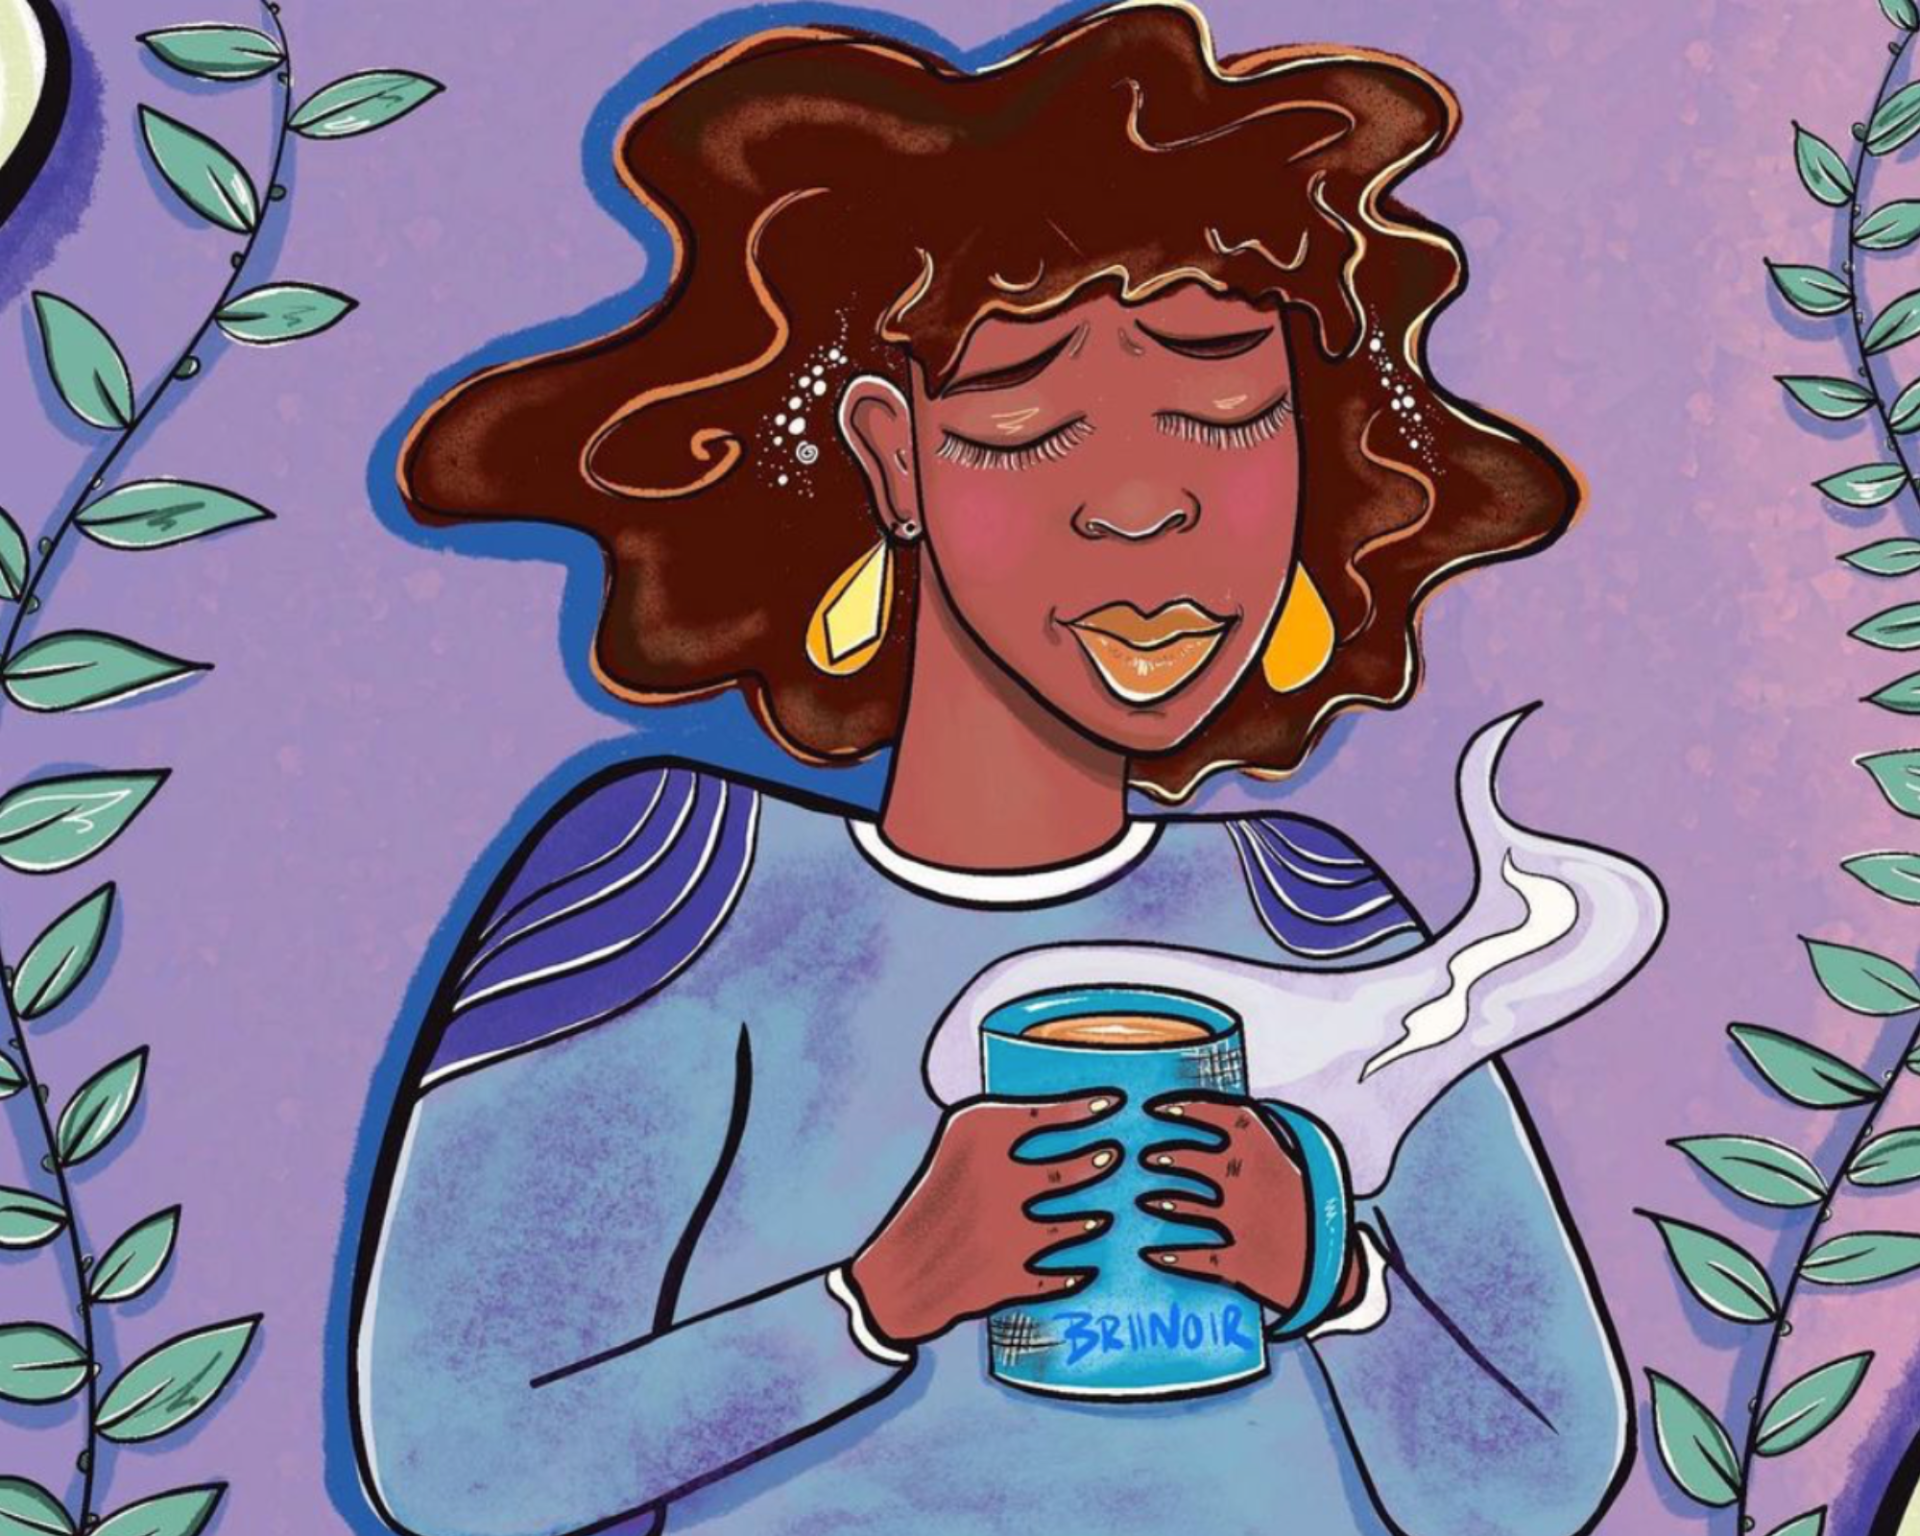 an illustration of a woman with dark skin and hair, yellow earrings and a light purple shirt. She holds a hot coffee mug, and her eyes are closed with a calm expression. Behind her is a dreamy purple background and green vines.